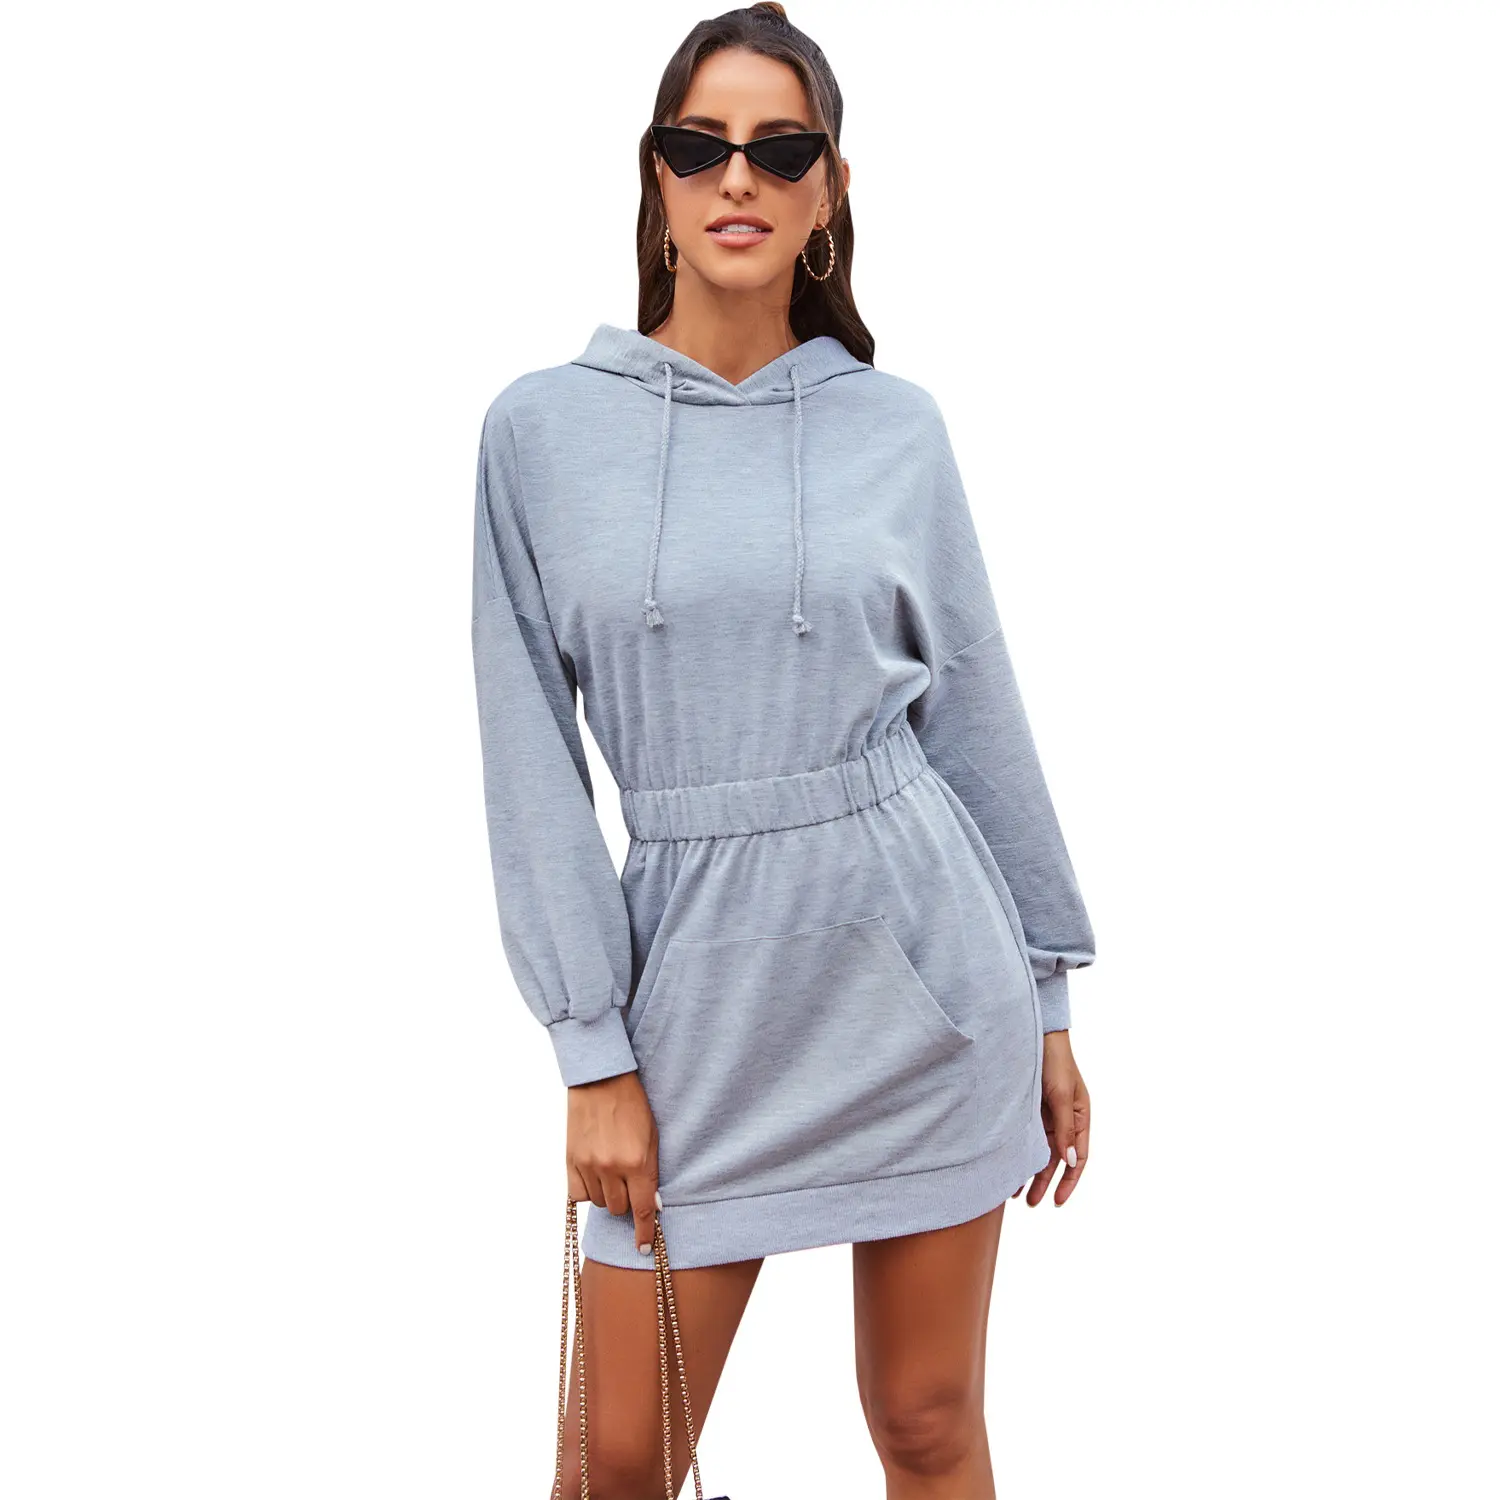 New spring Simple solid color hooded lace-up hoodie Fashion casual waist tucked hoodie dress